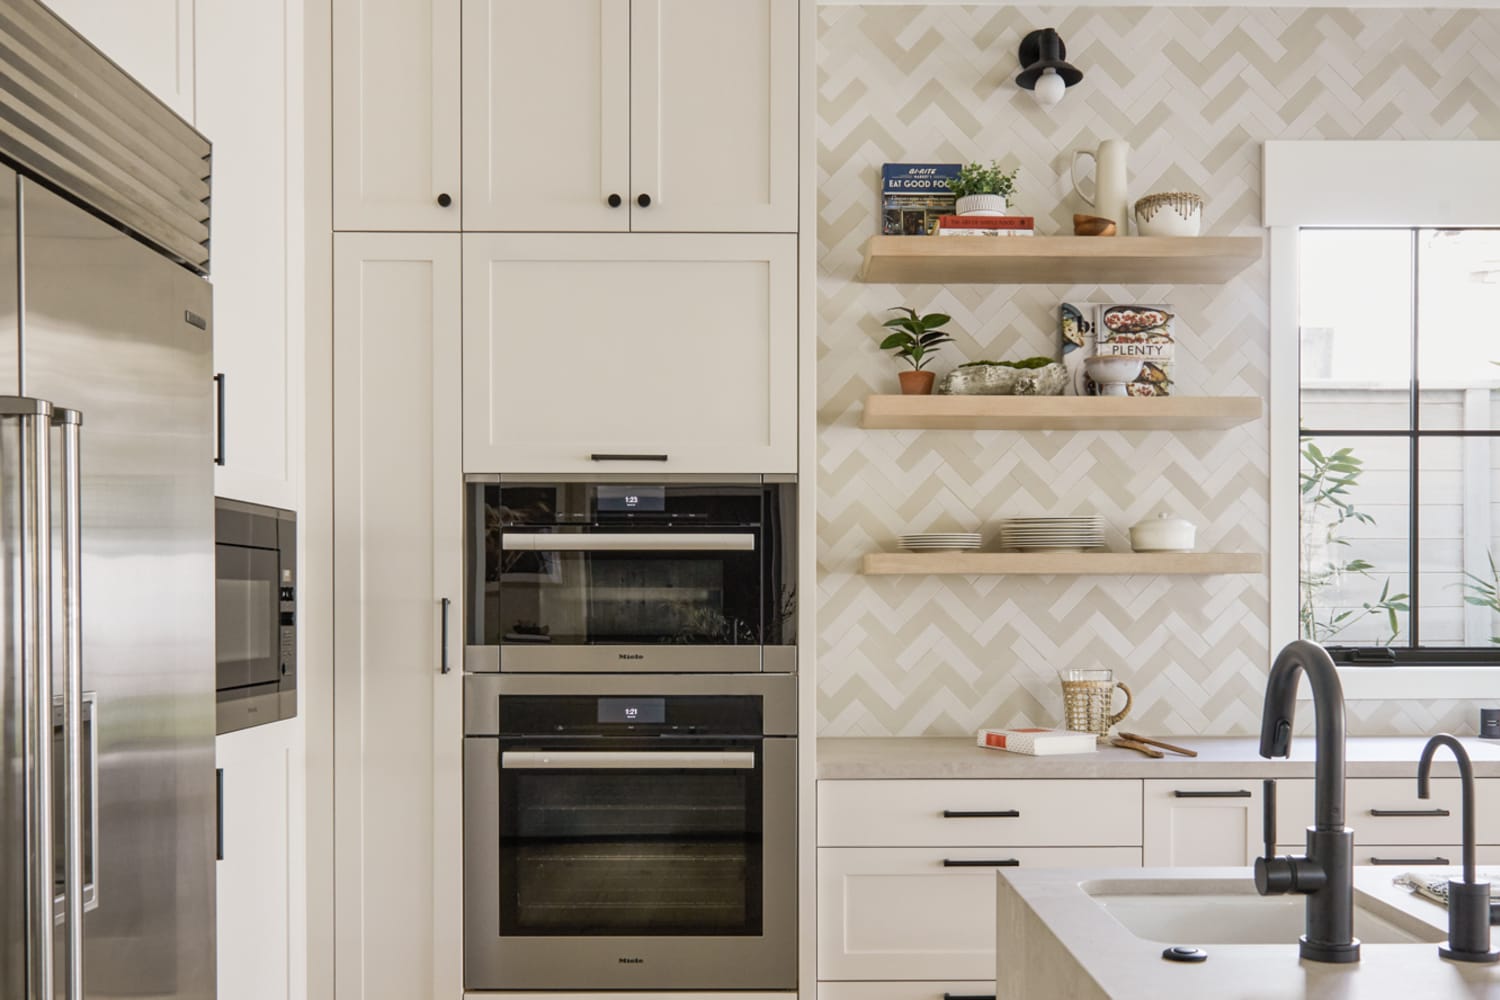 37 Kitchen Tile Ideas From Timeless to Trend-Forward